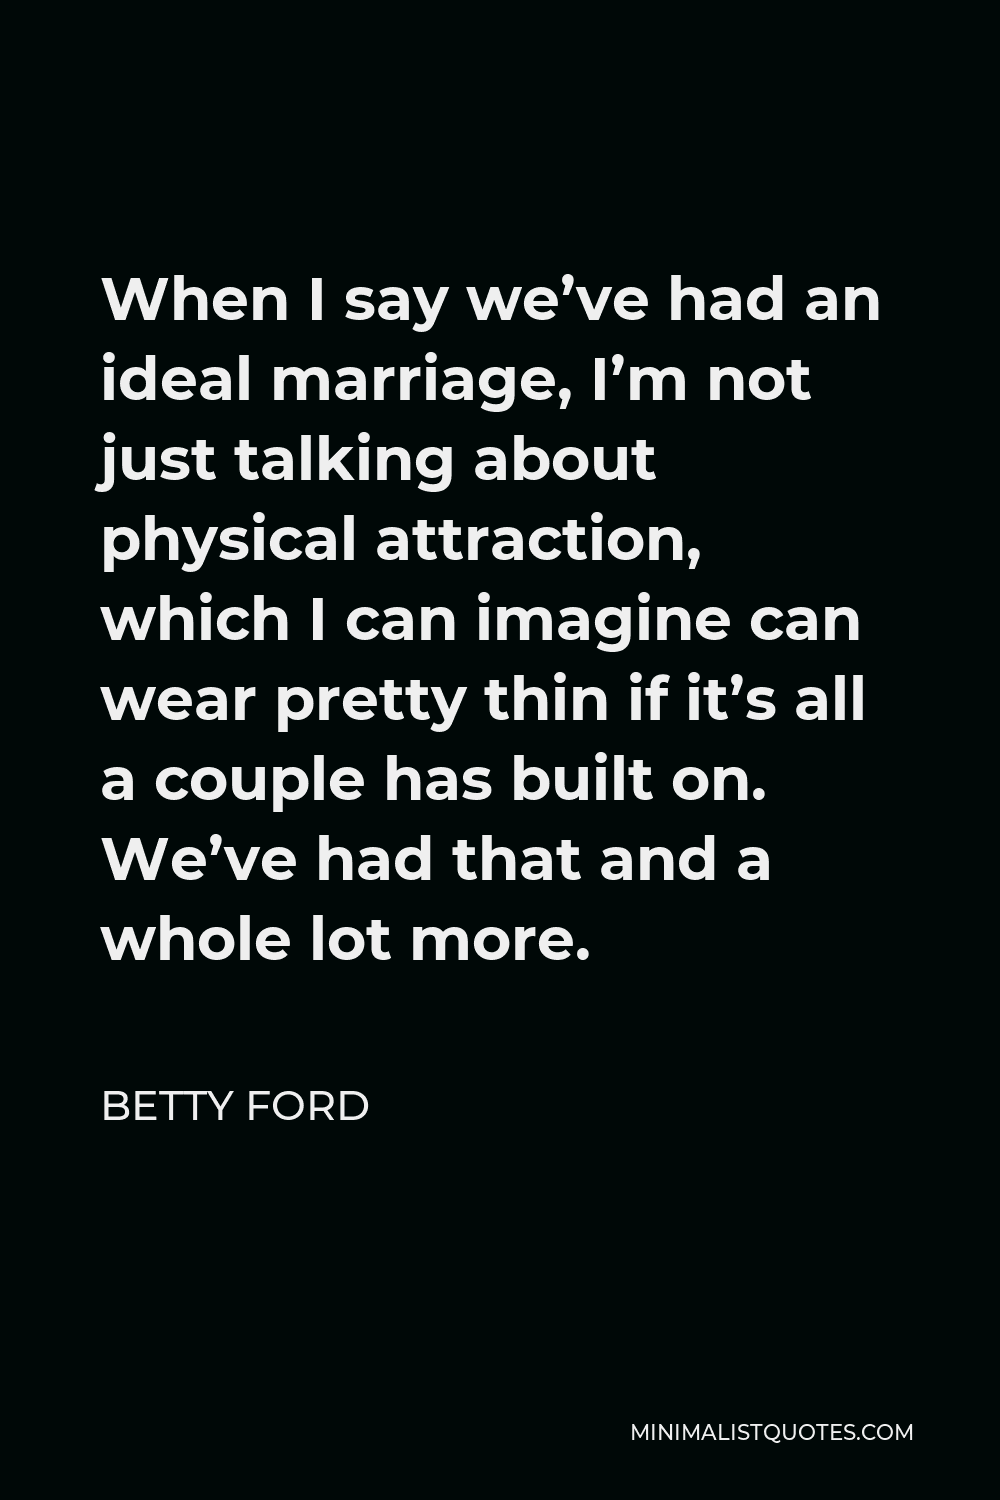 Betty Ford Quote - When I say we’ve had an ideal marriage, I’m not just talking about physical attraction, which I can imagine can wear pretty thin if it’s all a couple has built on. We’ve had that and a whole lot more.